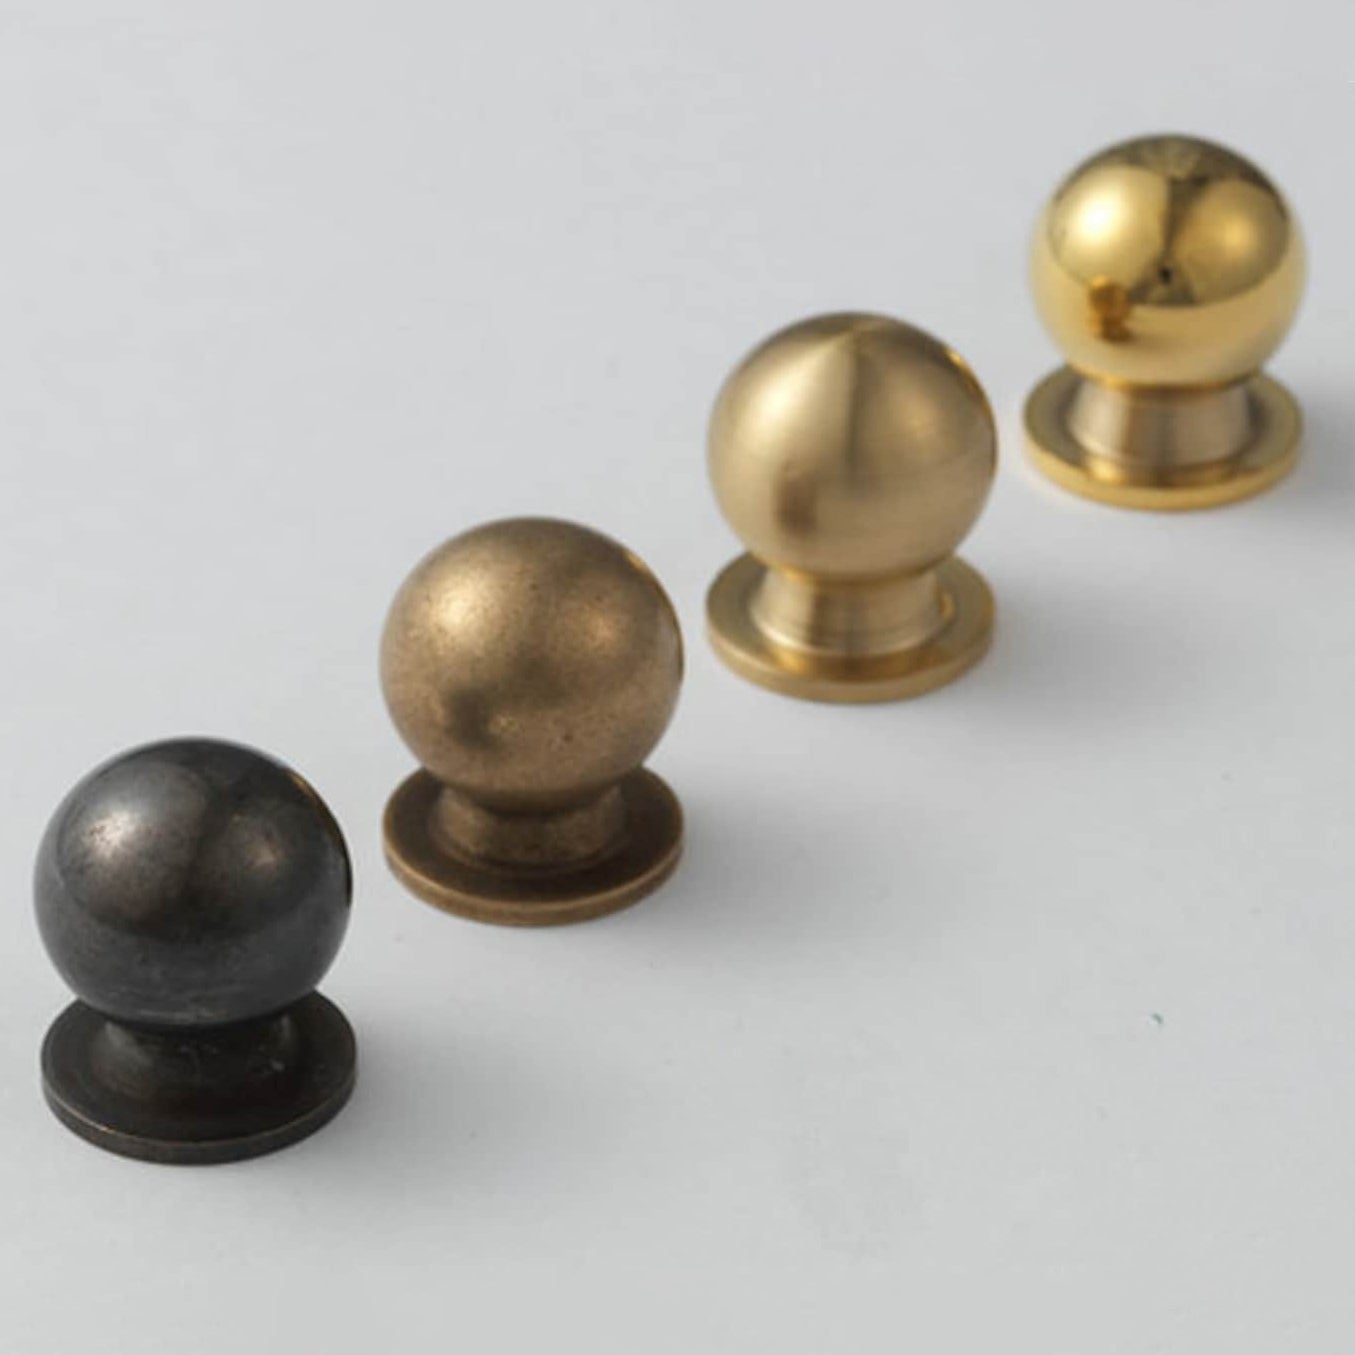 Rental Cabinet Knobs Aren’t Pretty, But These Cheap Swaps Are